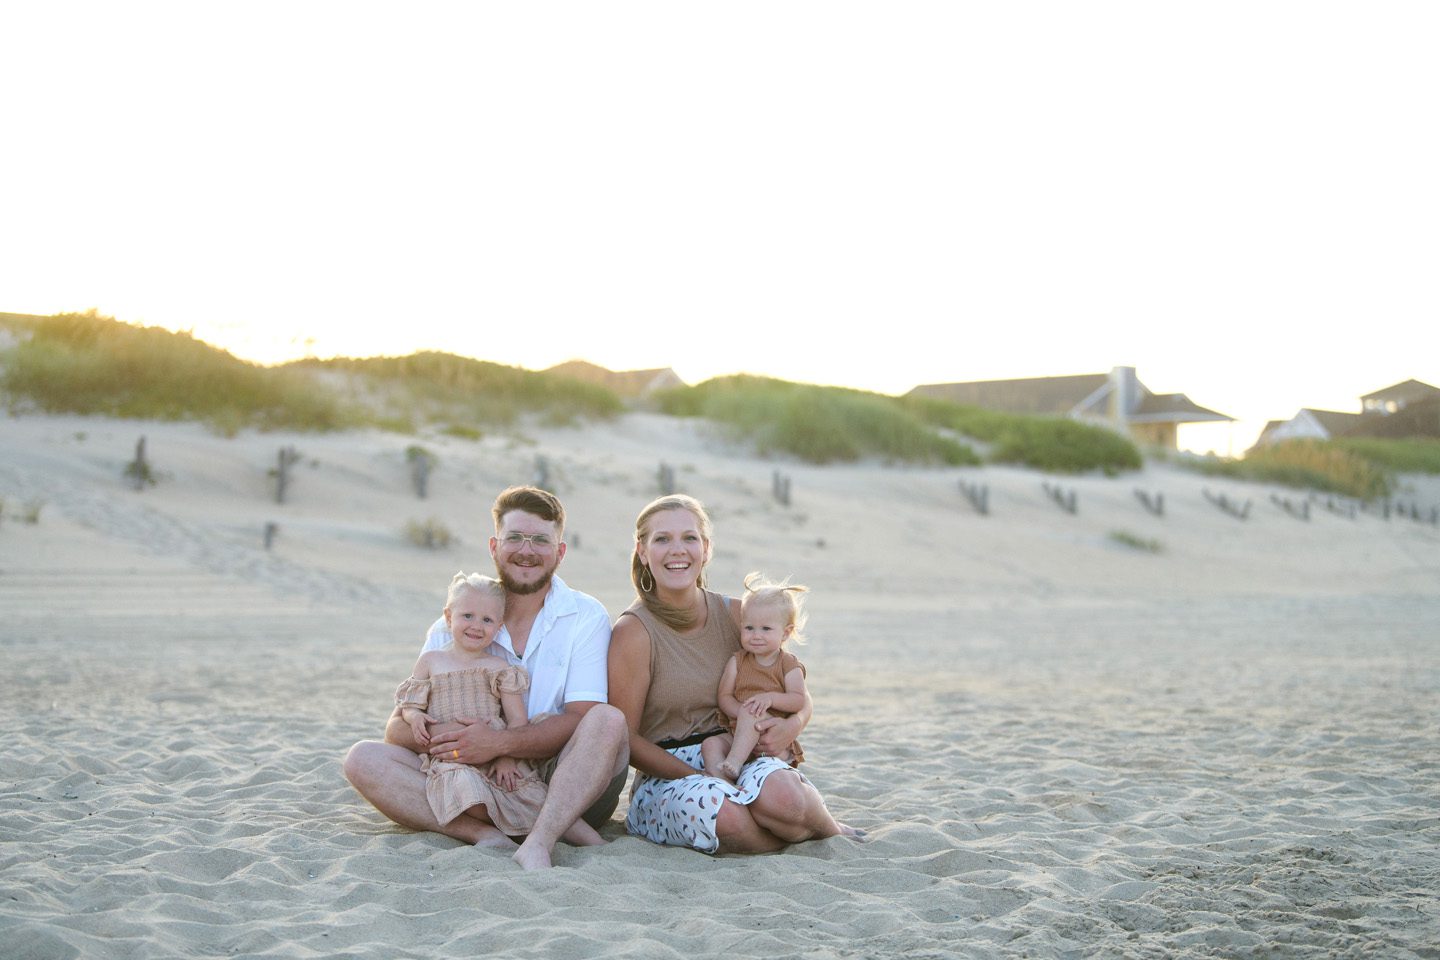 What to wear guide, a family wearing whites, creams, and tans for their Outer Banks portraits